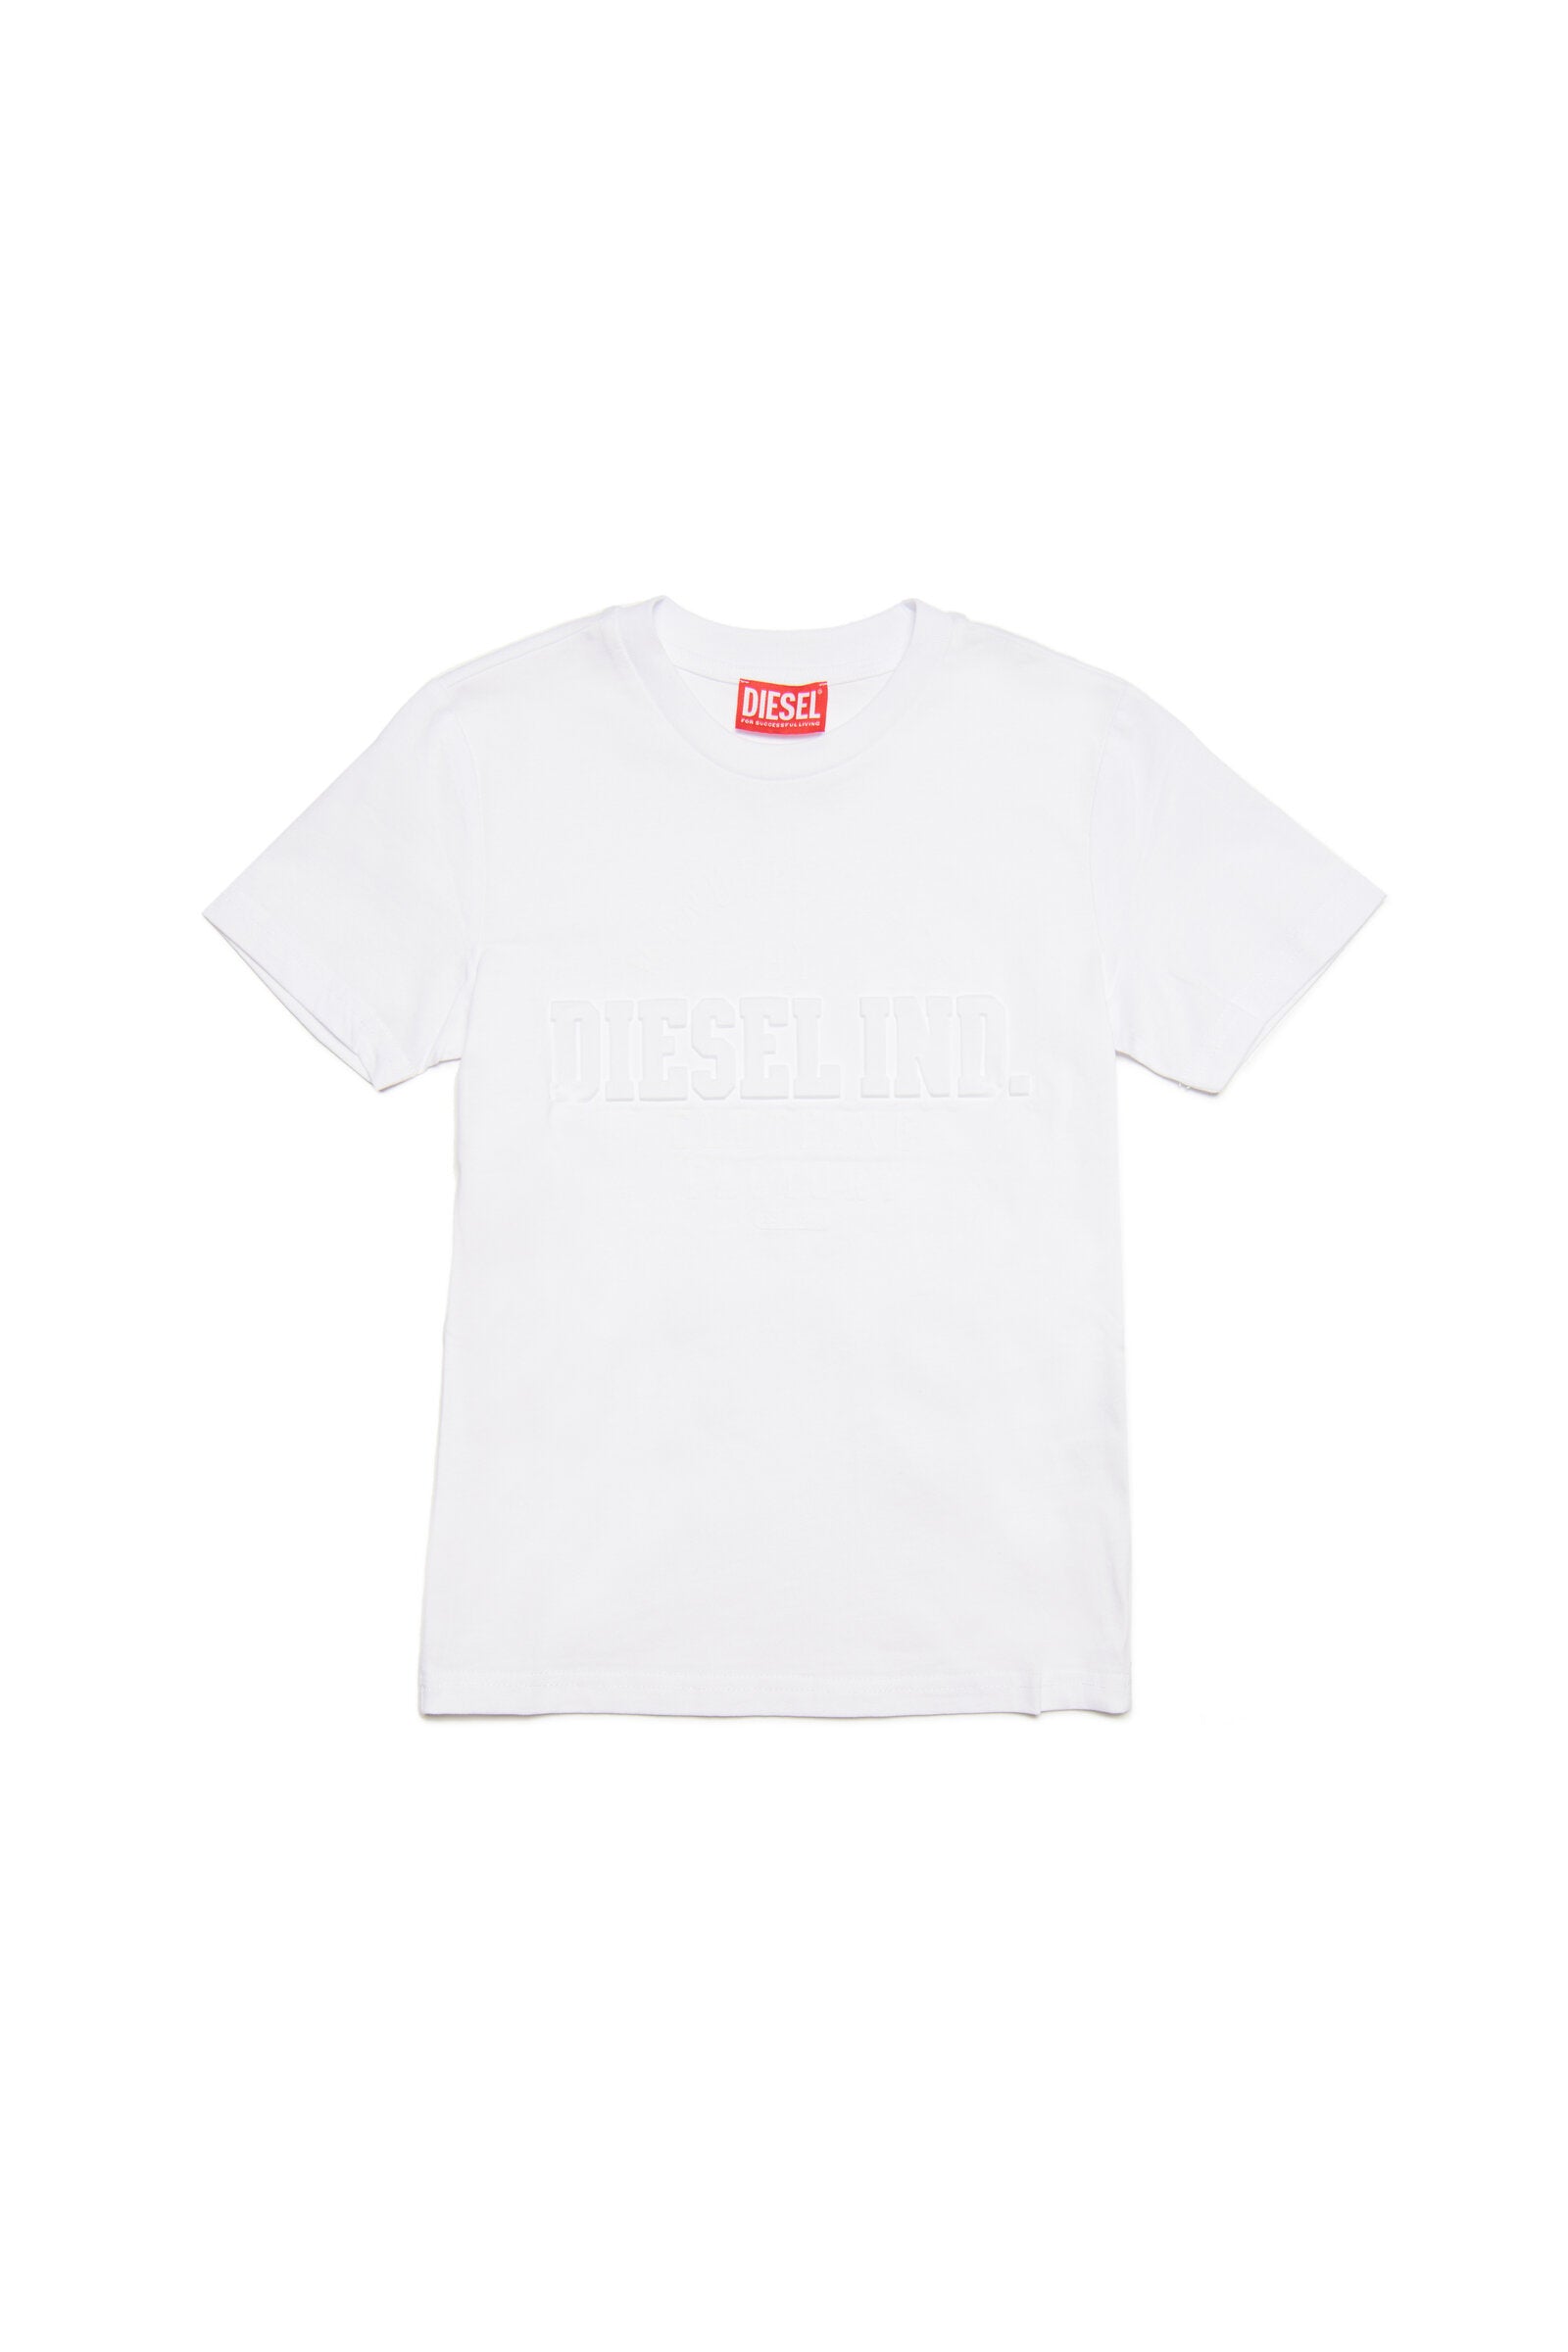 White jersey T-shirt with Diesel Ind. logo.